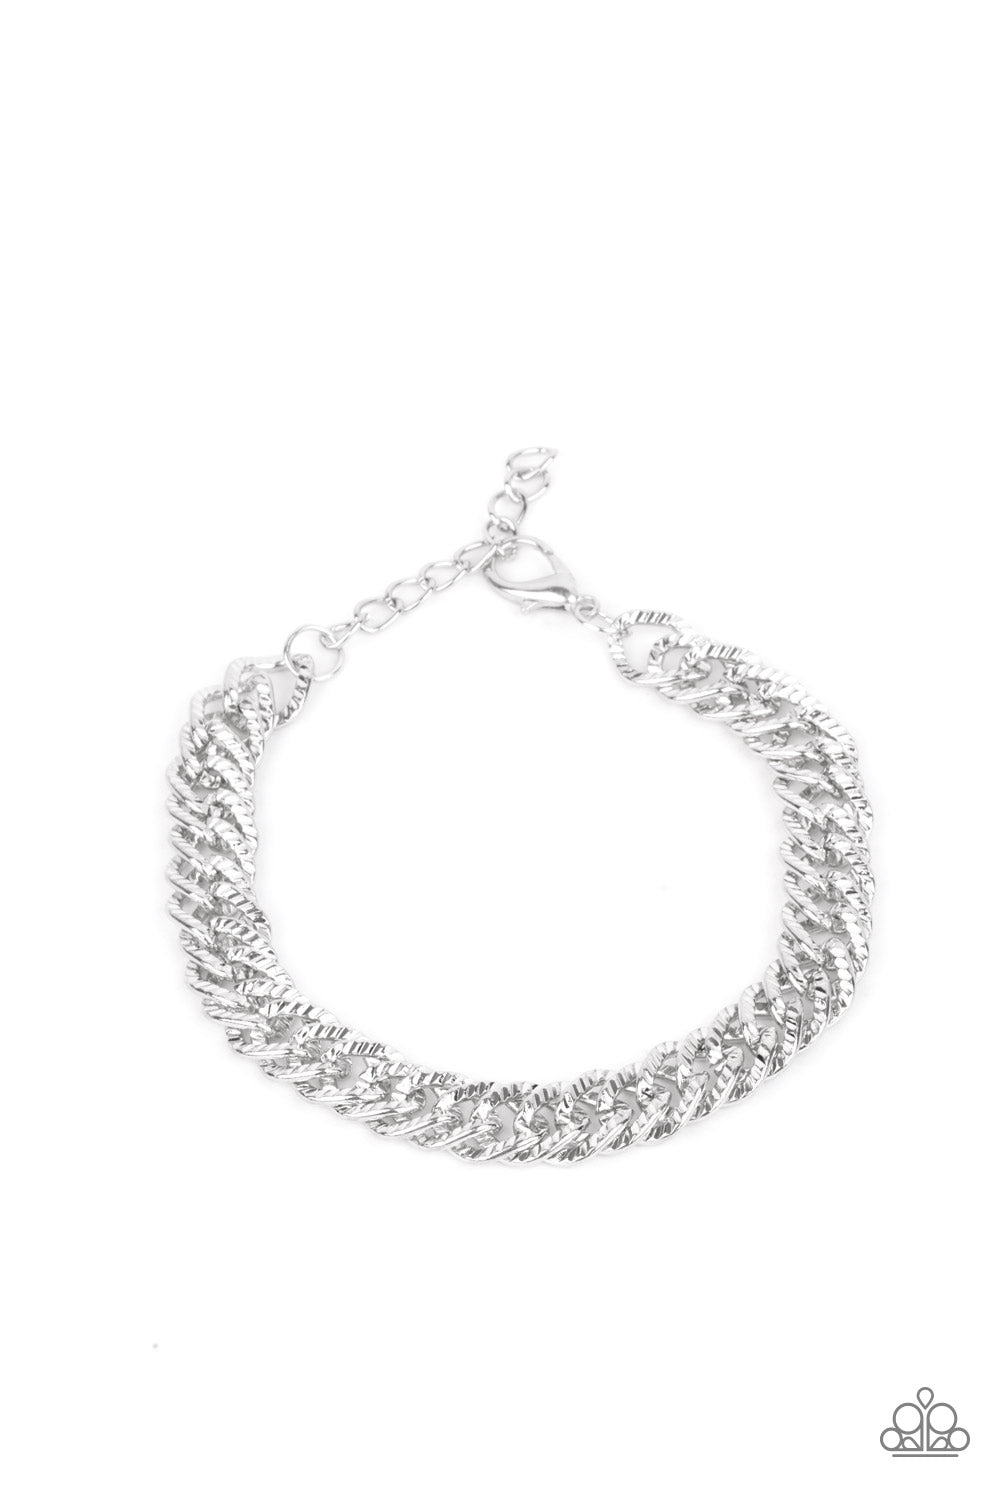 Etched in linear textures, an oversized silver chain drapes around the wrist for a dramatic industrial effect. Features an adjustable clasp closure.  Sold as one individual bracelet.   Get The Complete Look! Necklace: "Urban Uppercut - Silver" (Sold Separately)